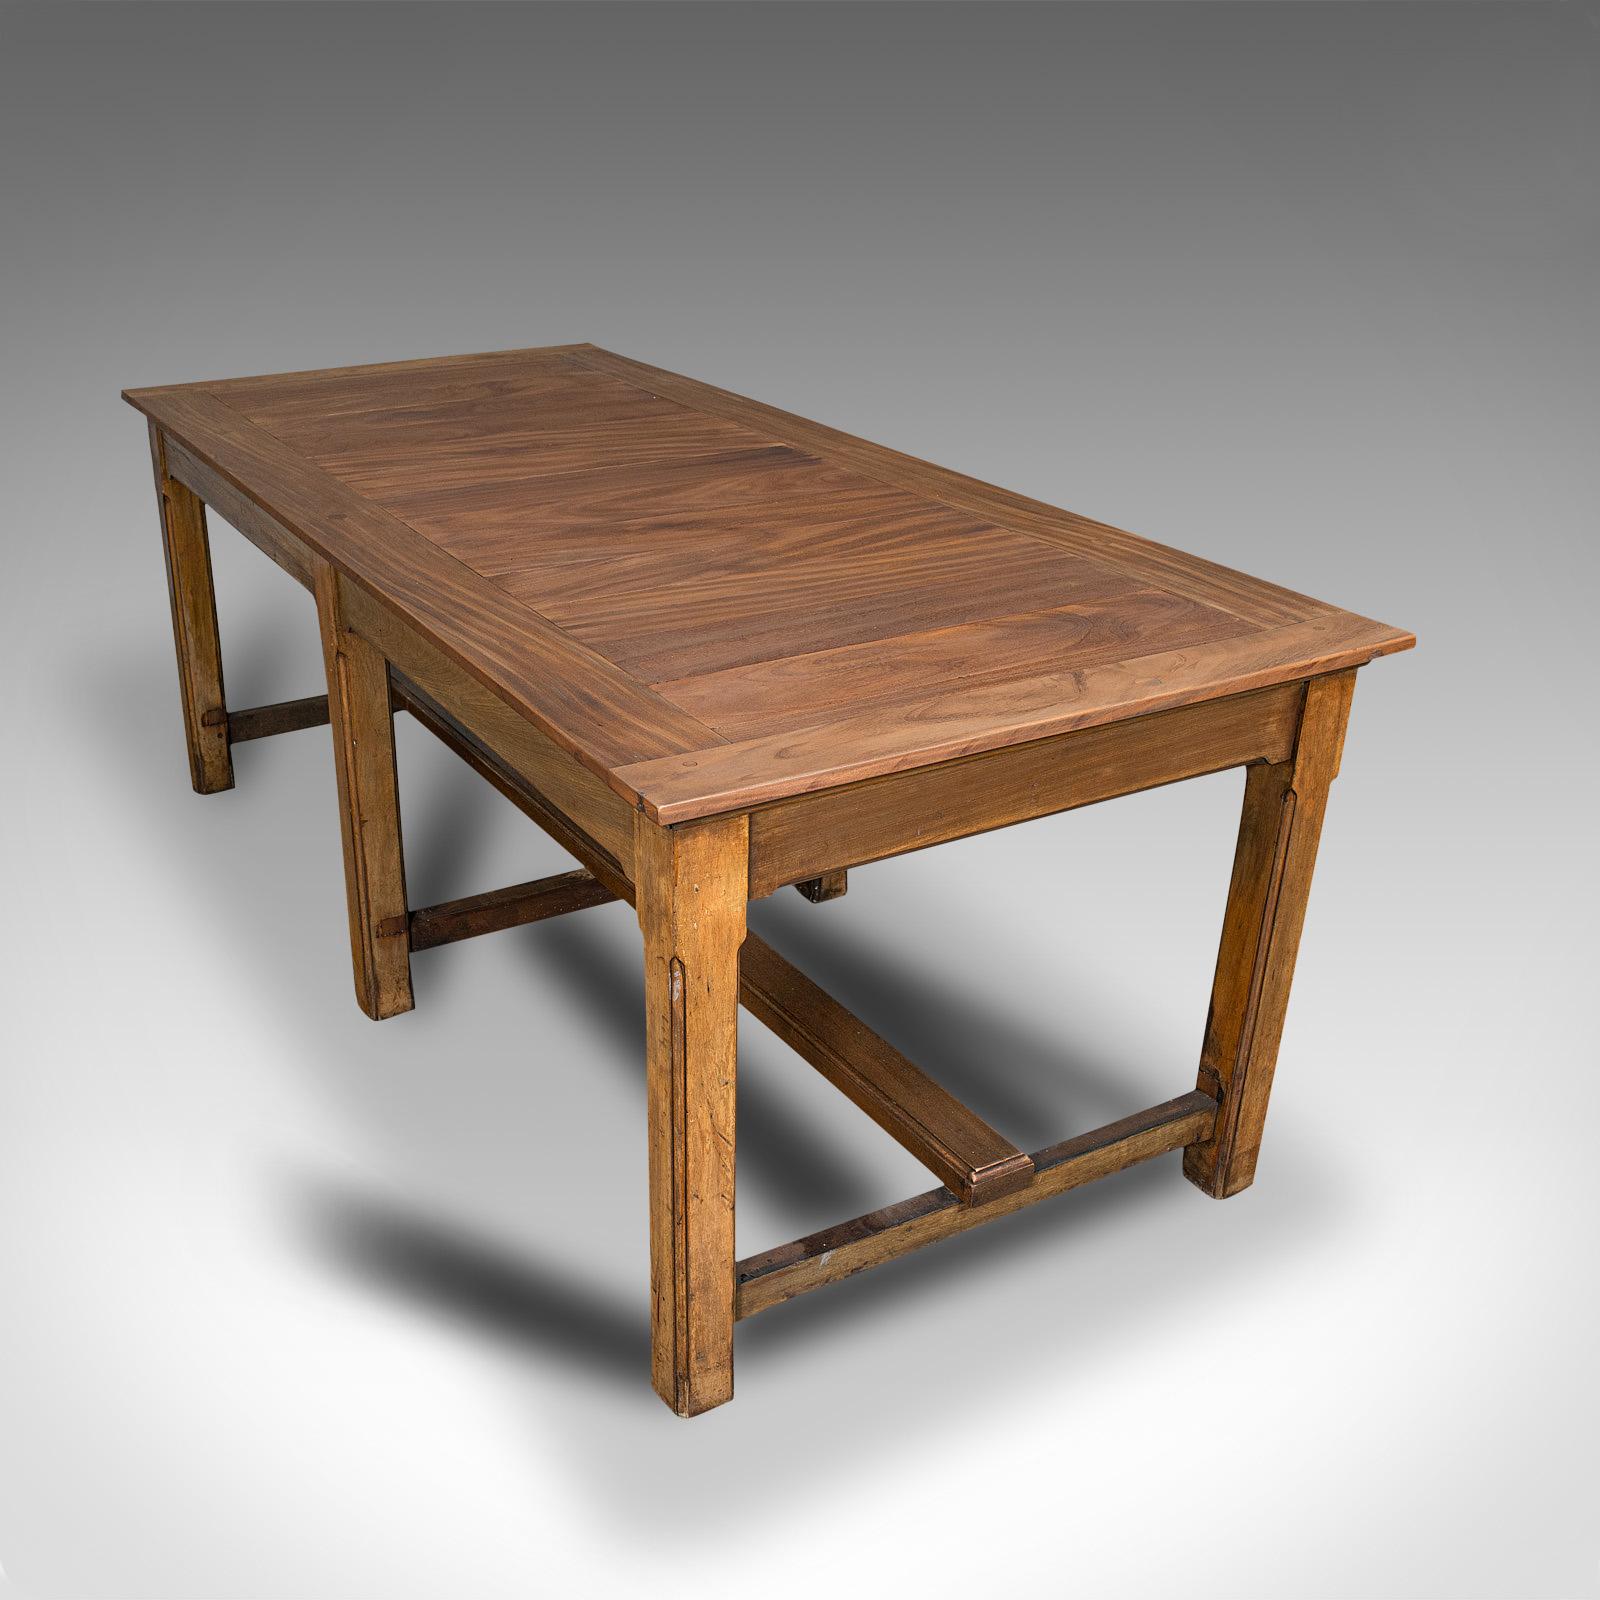 19th Century Large Antique Refectory Table, English, Teak, Mahogany, Dining, Industrial, 1900